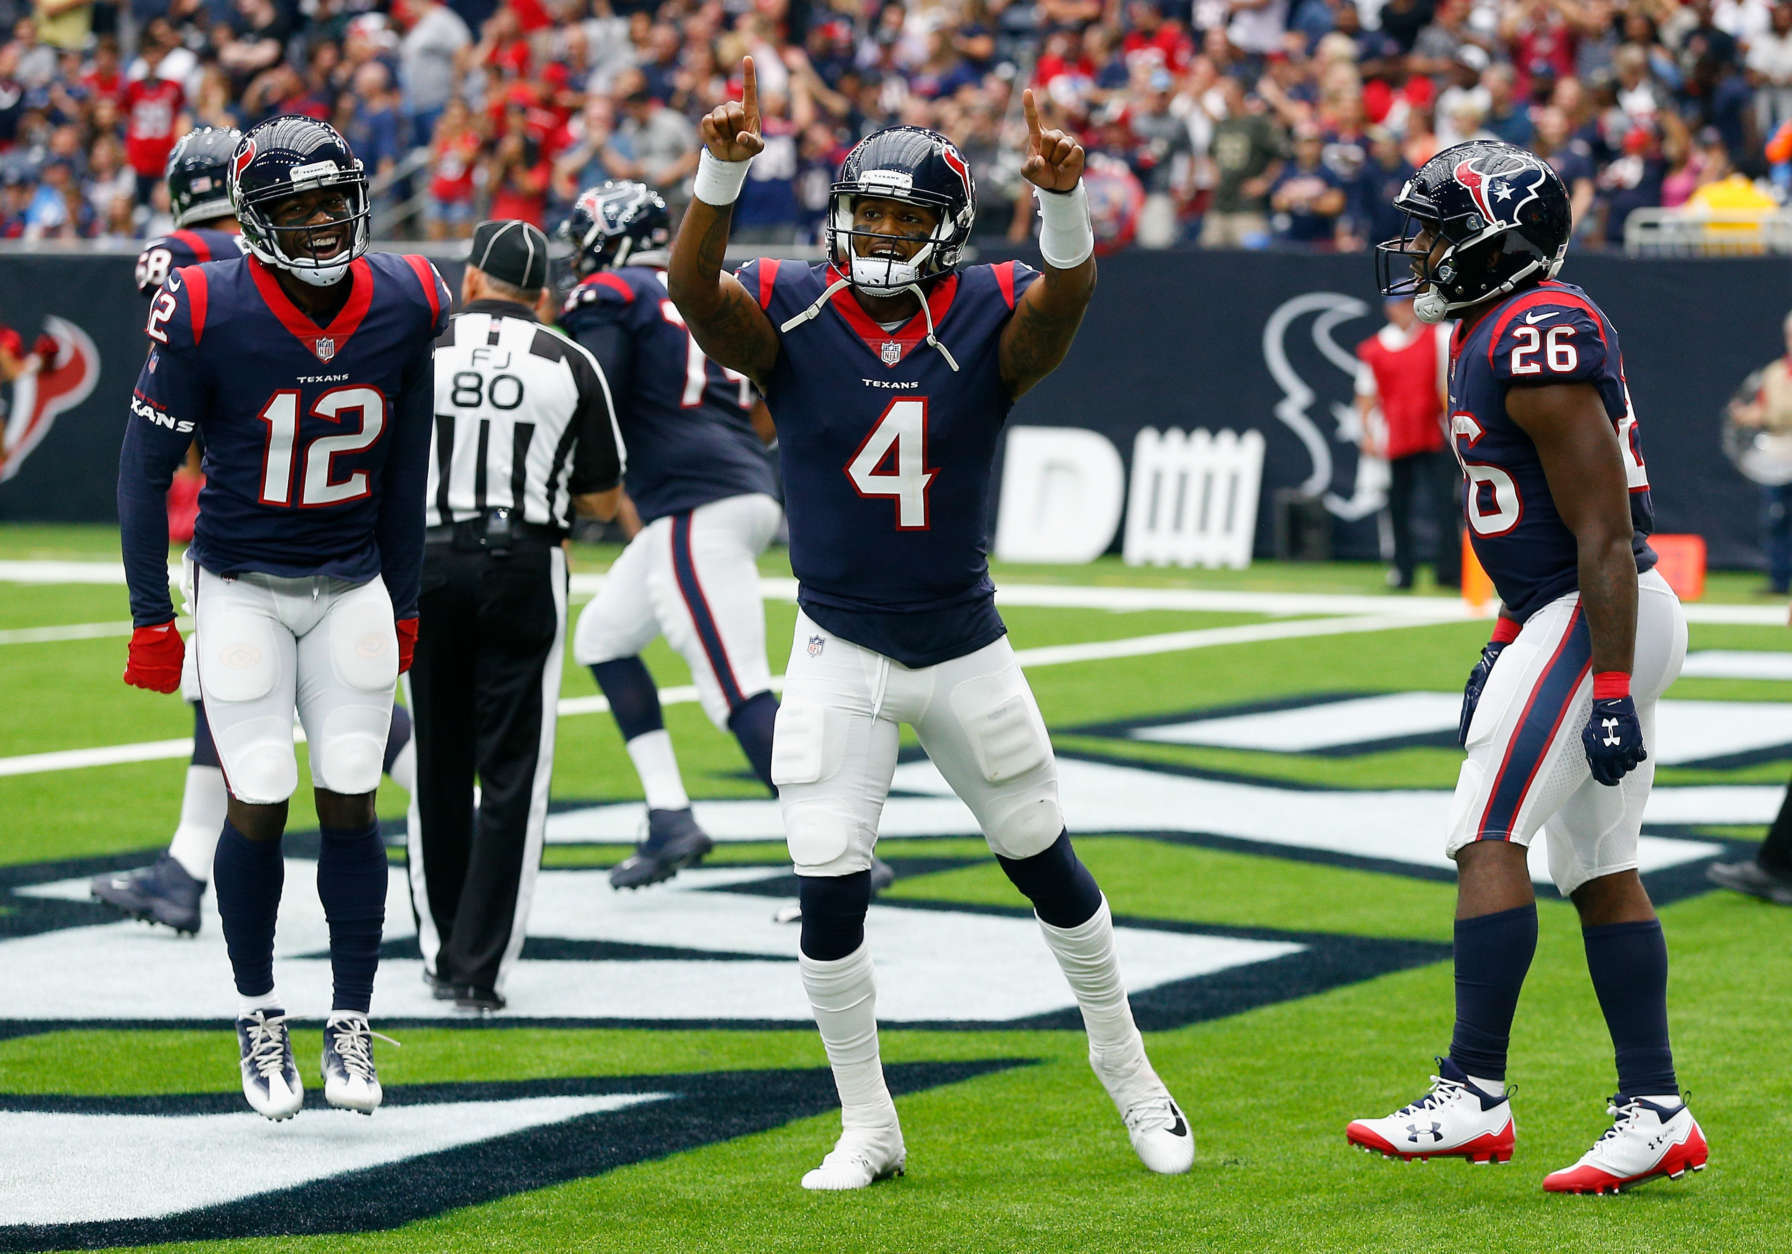 HOUSTON, TX - OCTOBER 01:  Deshaun Watson #4 of the Houston Texans celebrates with Bruce Ellington #12 and Lamar Miller #26 after scoring on a one yard run in the second quarter against the Tennessee Titans at NRG Stadium on October 1, 2017 in Houston, Texas.  (Photo by Bob Levey/Getty Images)